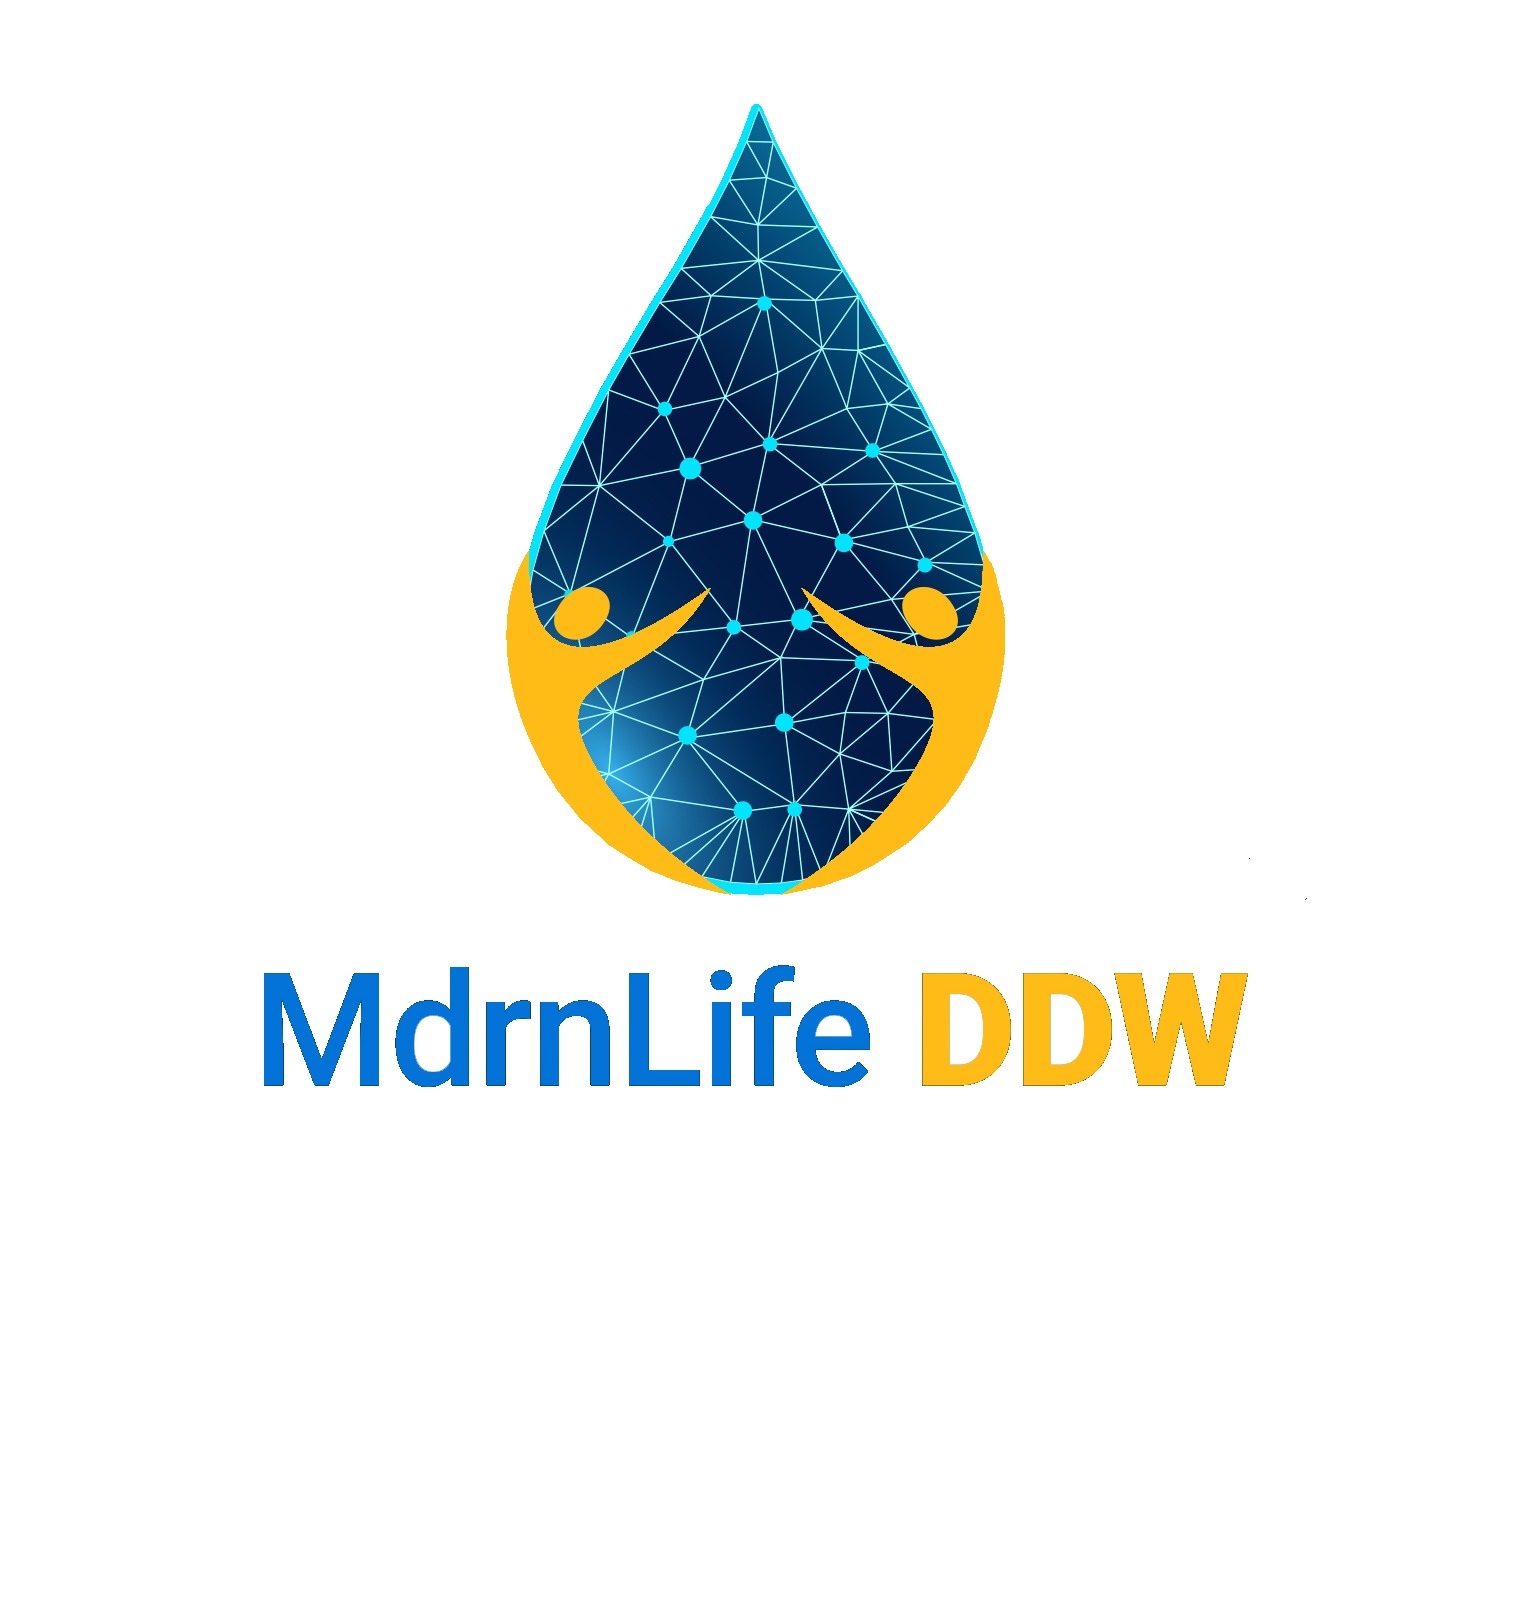 Mdrn-Life DDW Logo, Elevate your health with Deuterium depleted water